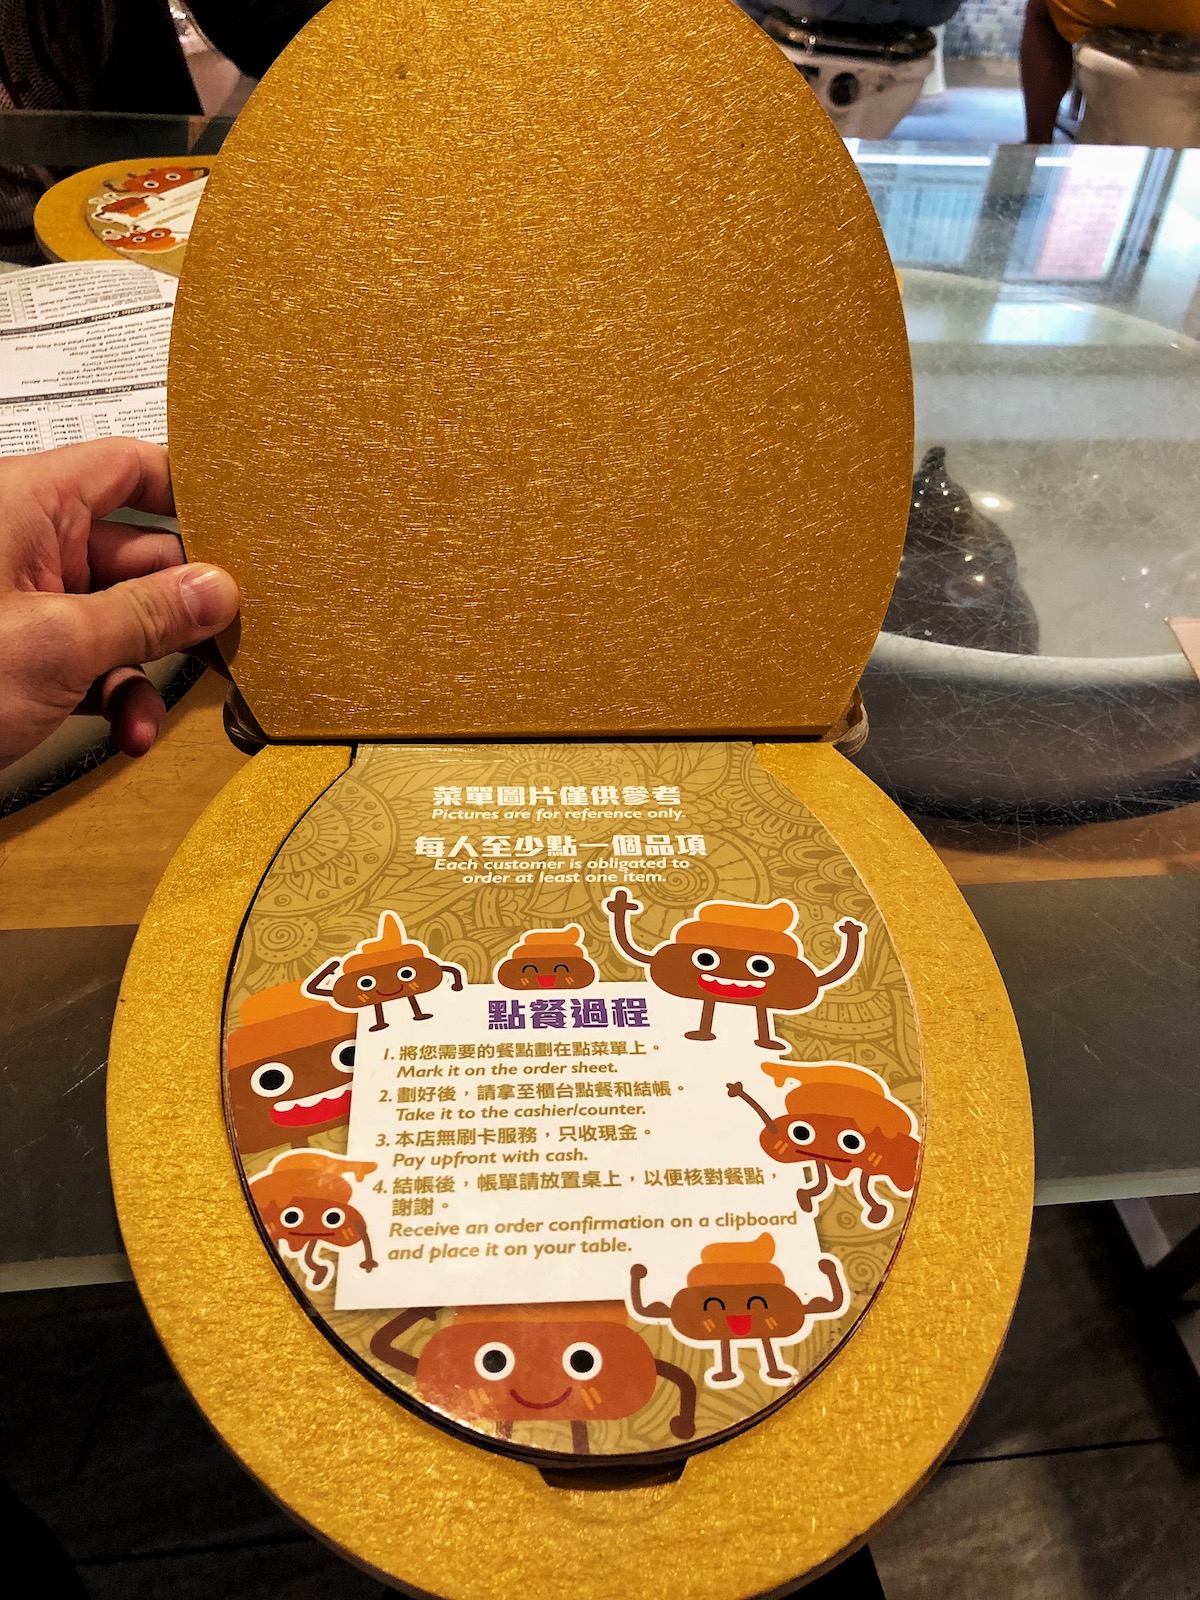 A menu and instructions in the shape of a toilet seat